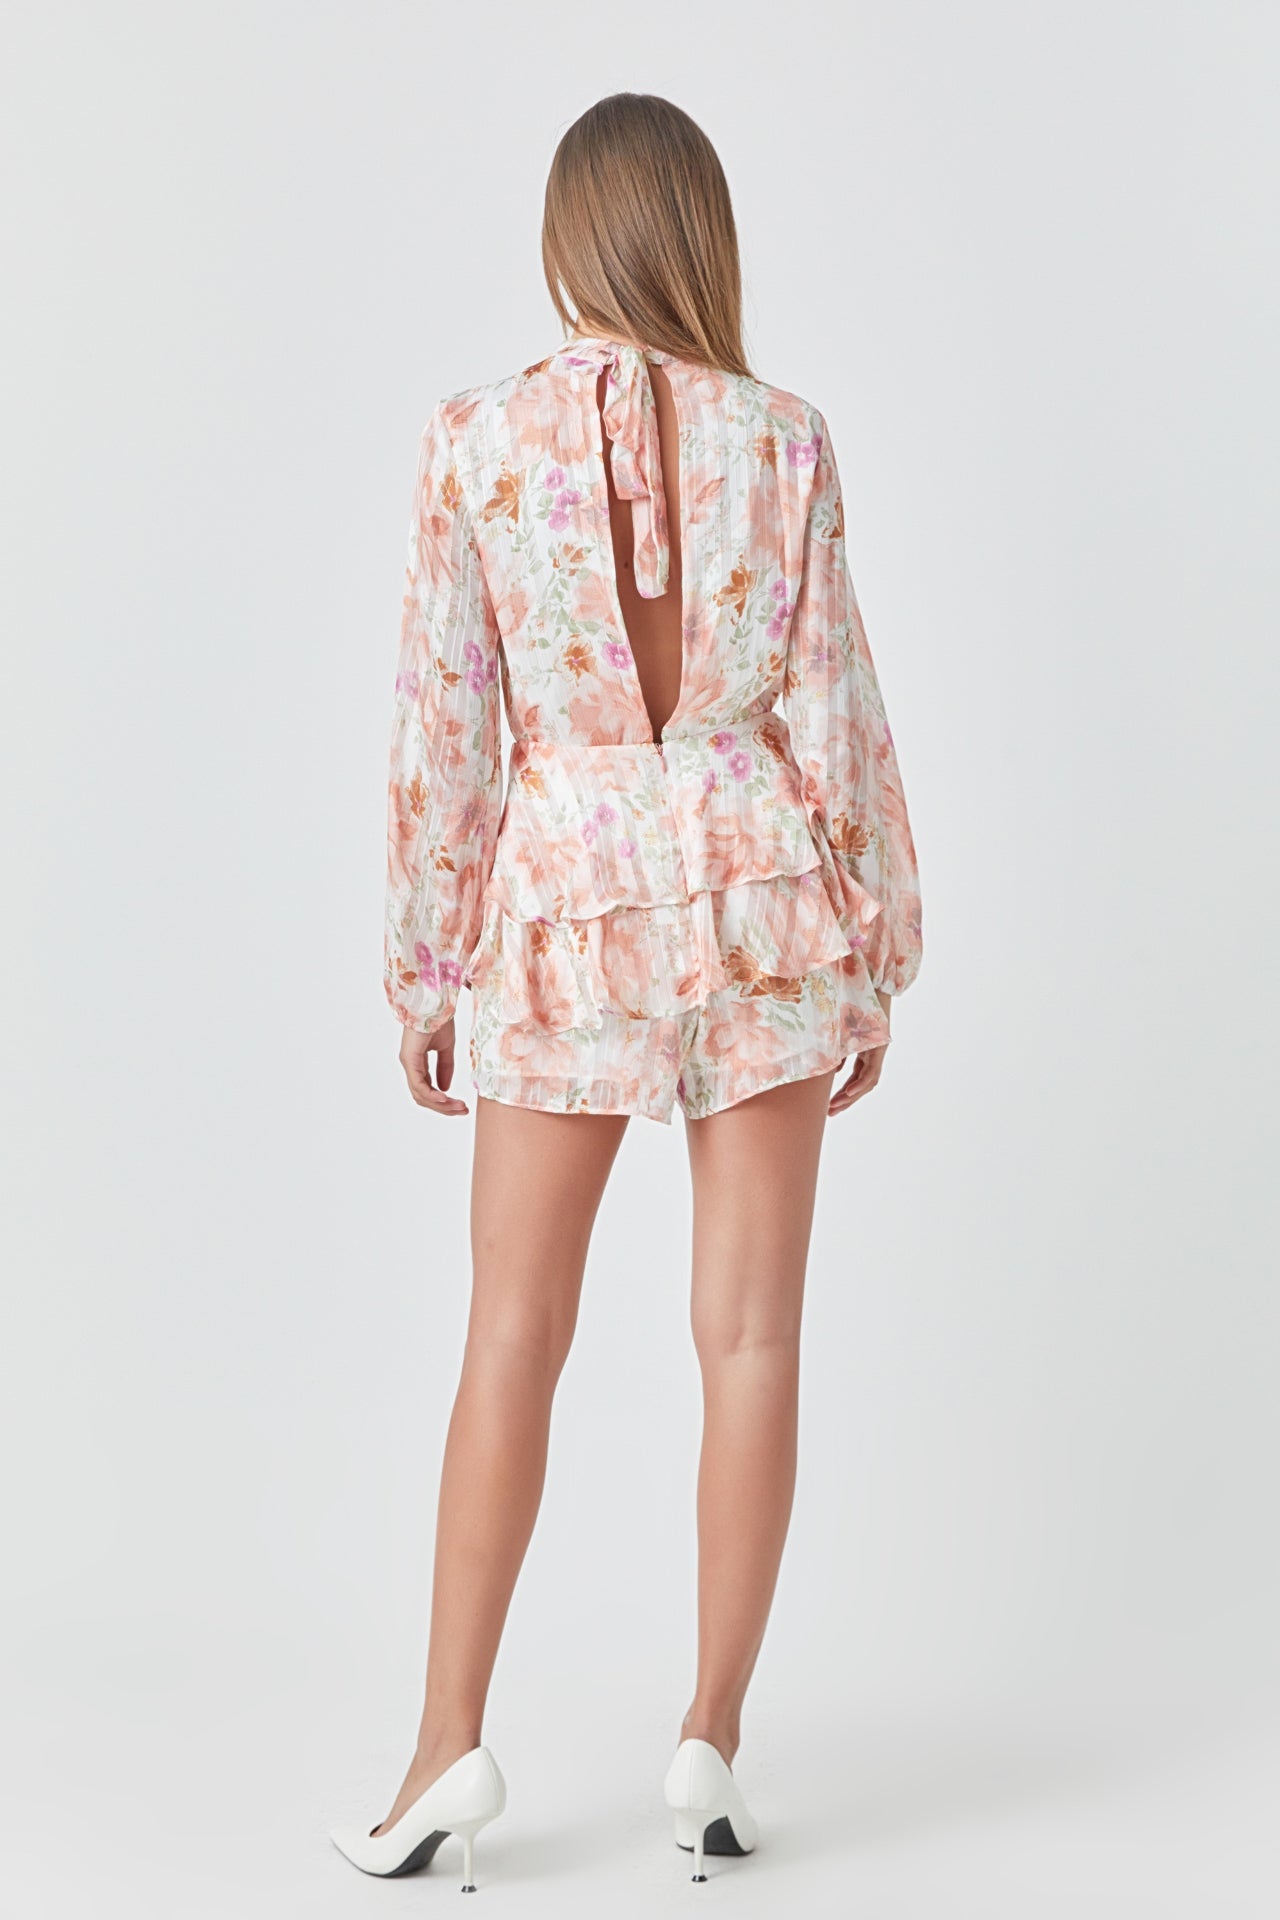 ENDLESS ROSE - Long Sleeve Floral Romper - ROMPERS available at Objectrare